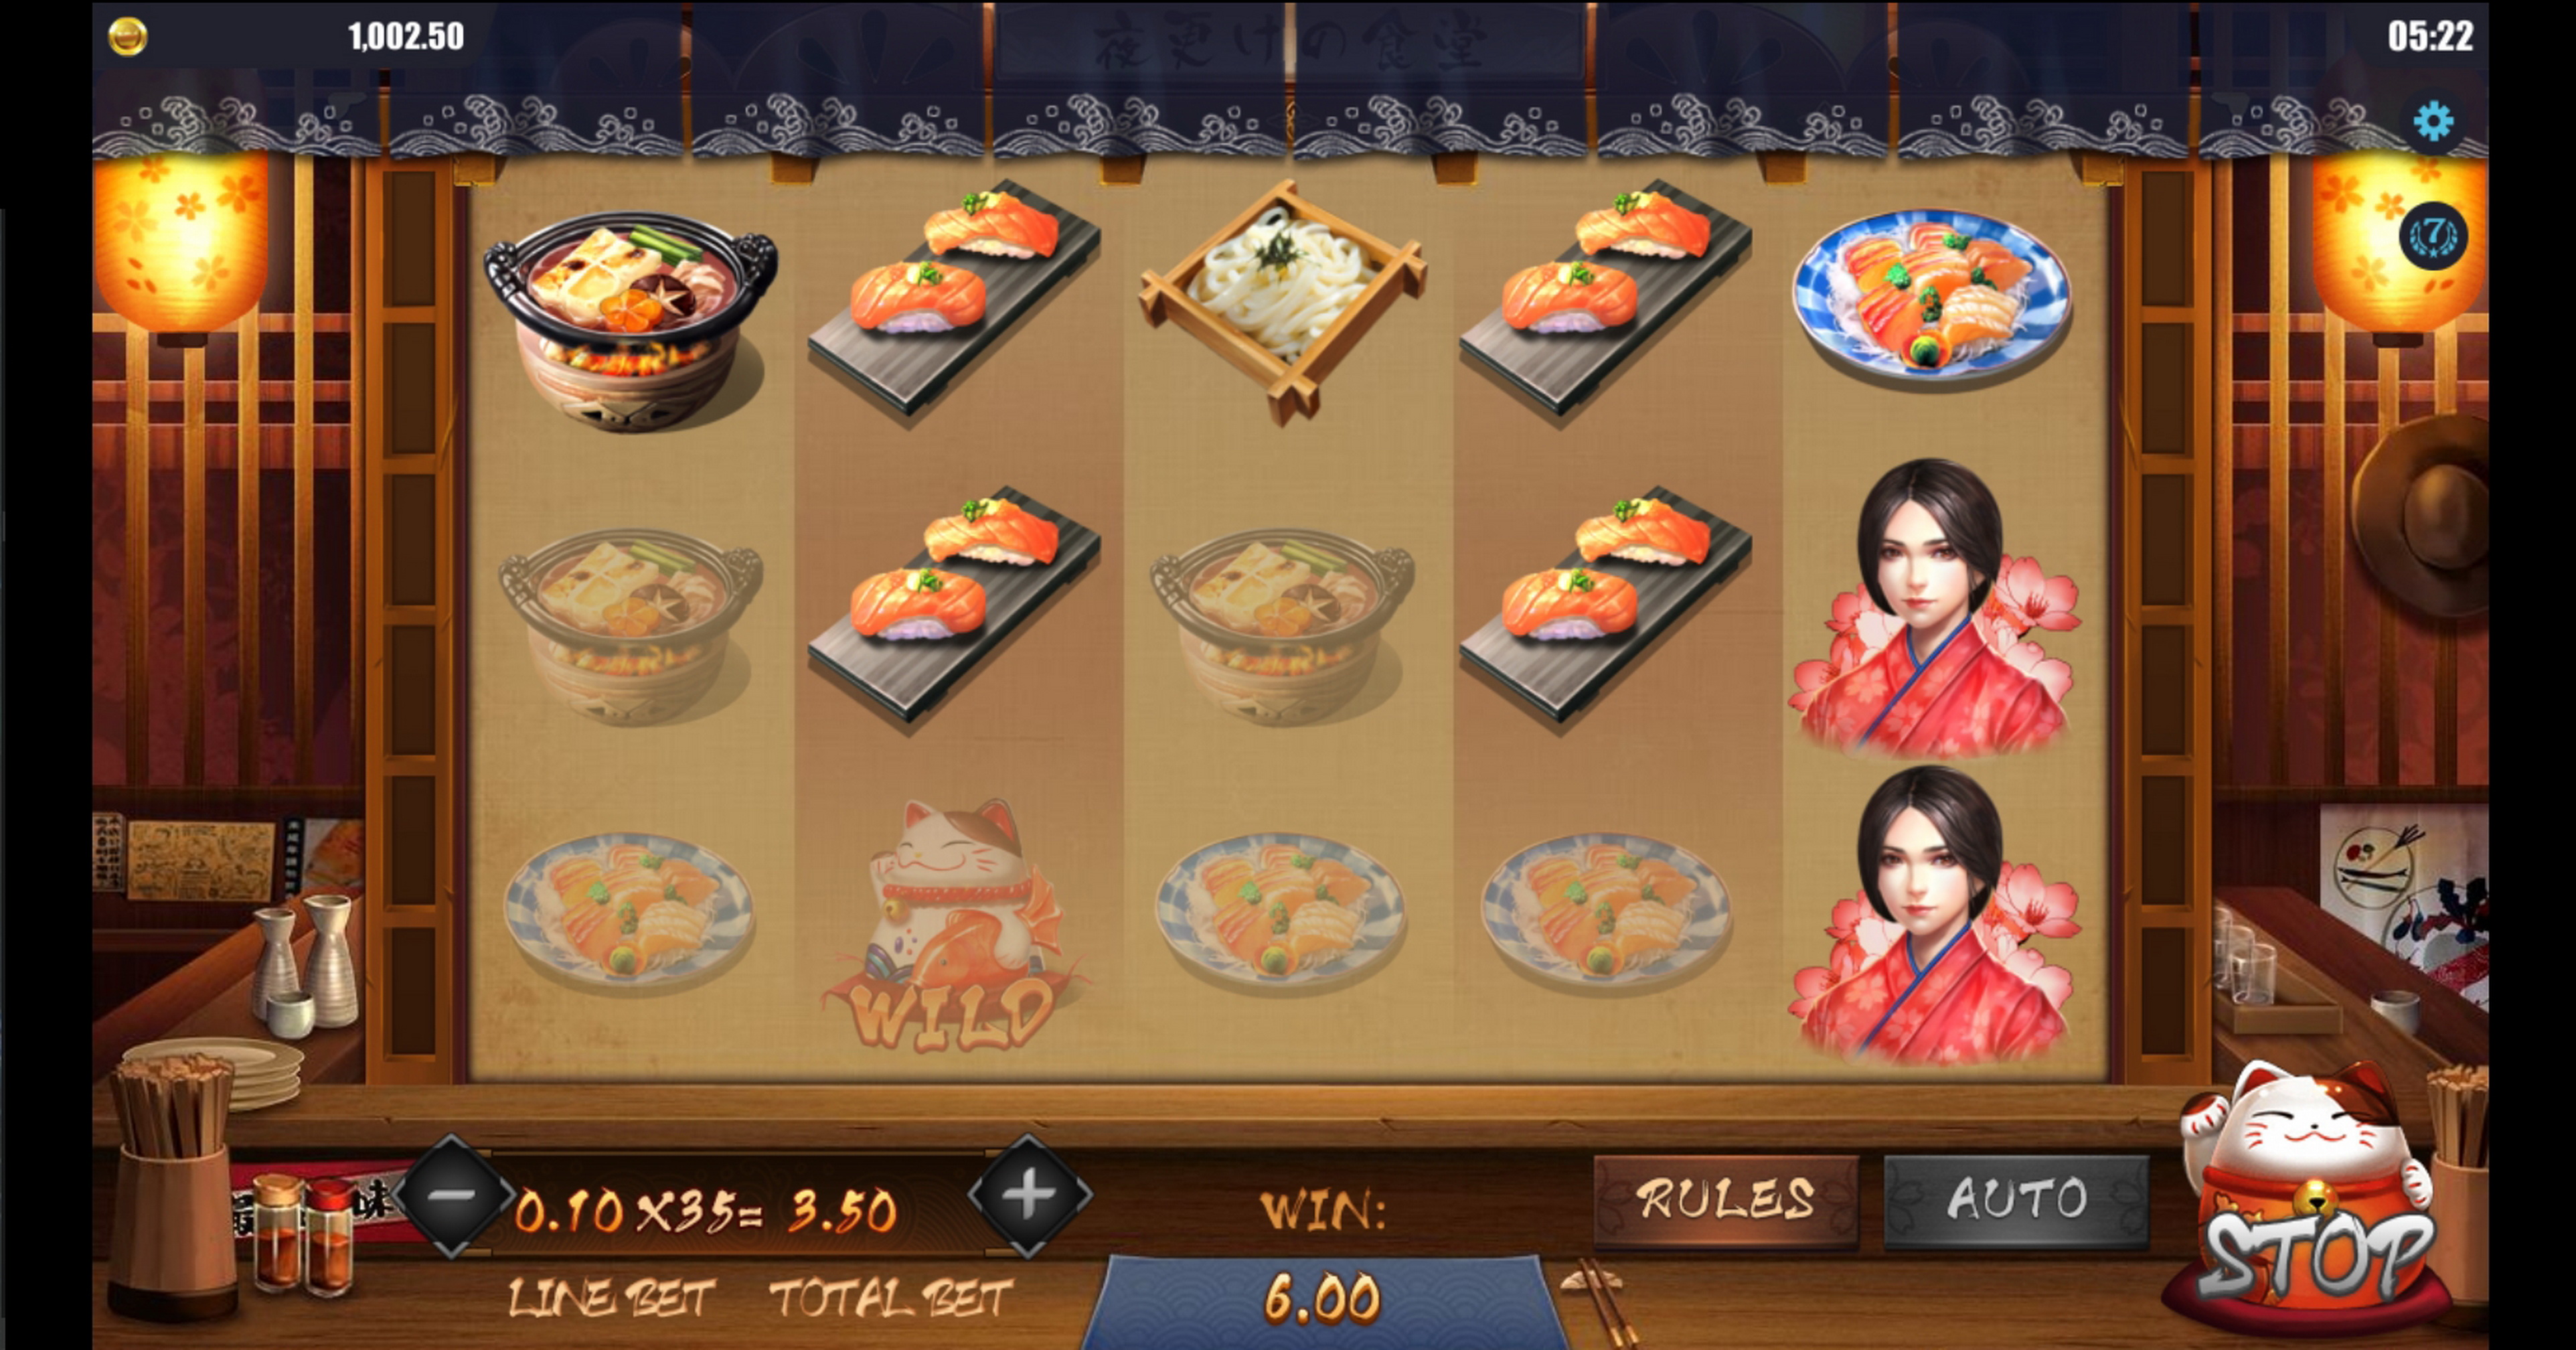 Win Money in Midnight Diner Free Slot Game by Dreamtech Gaming